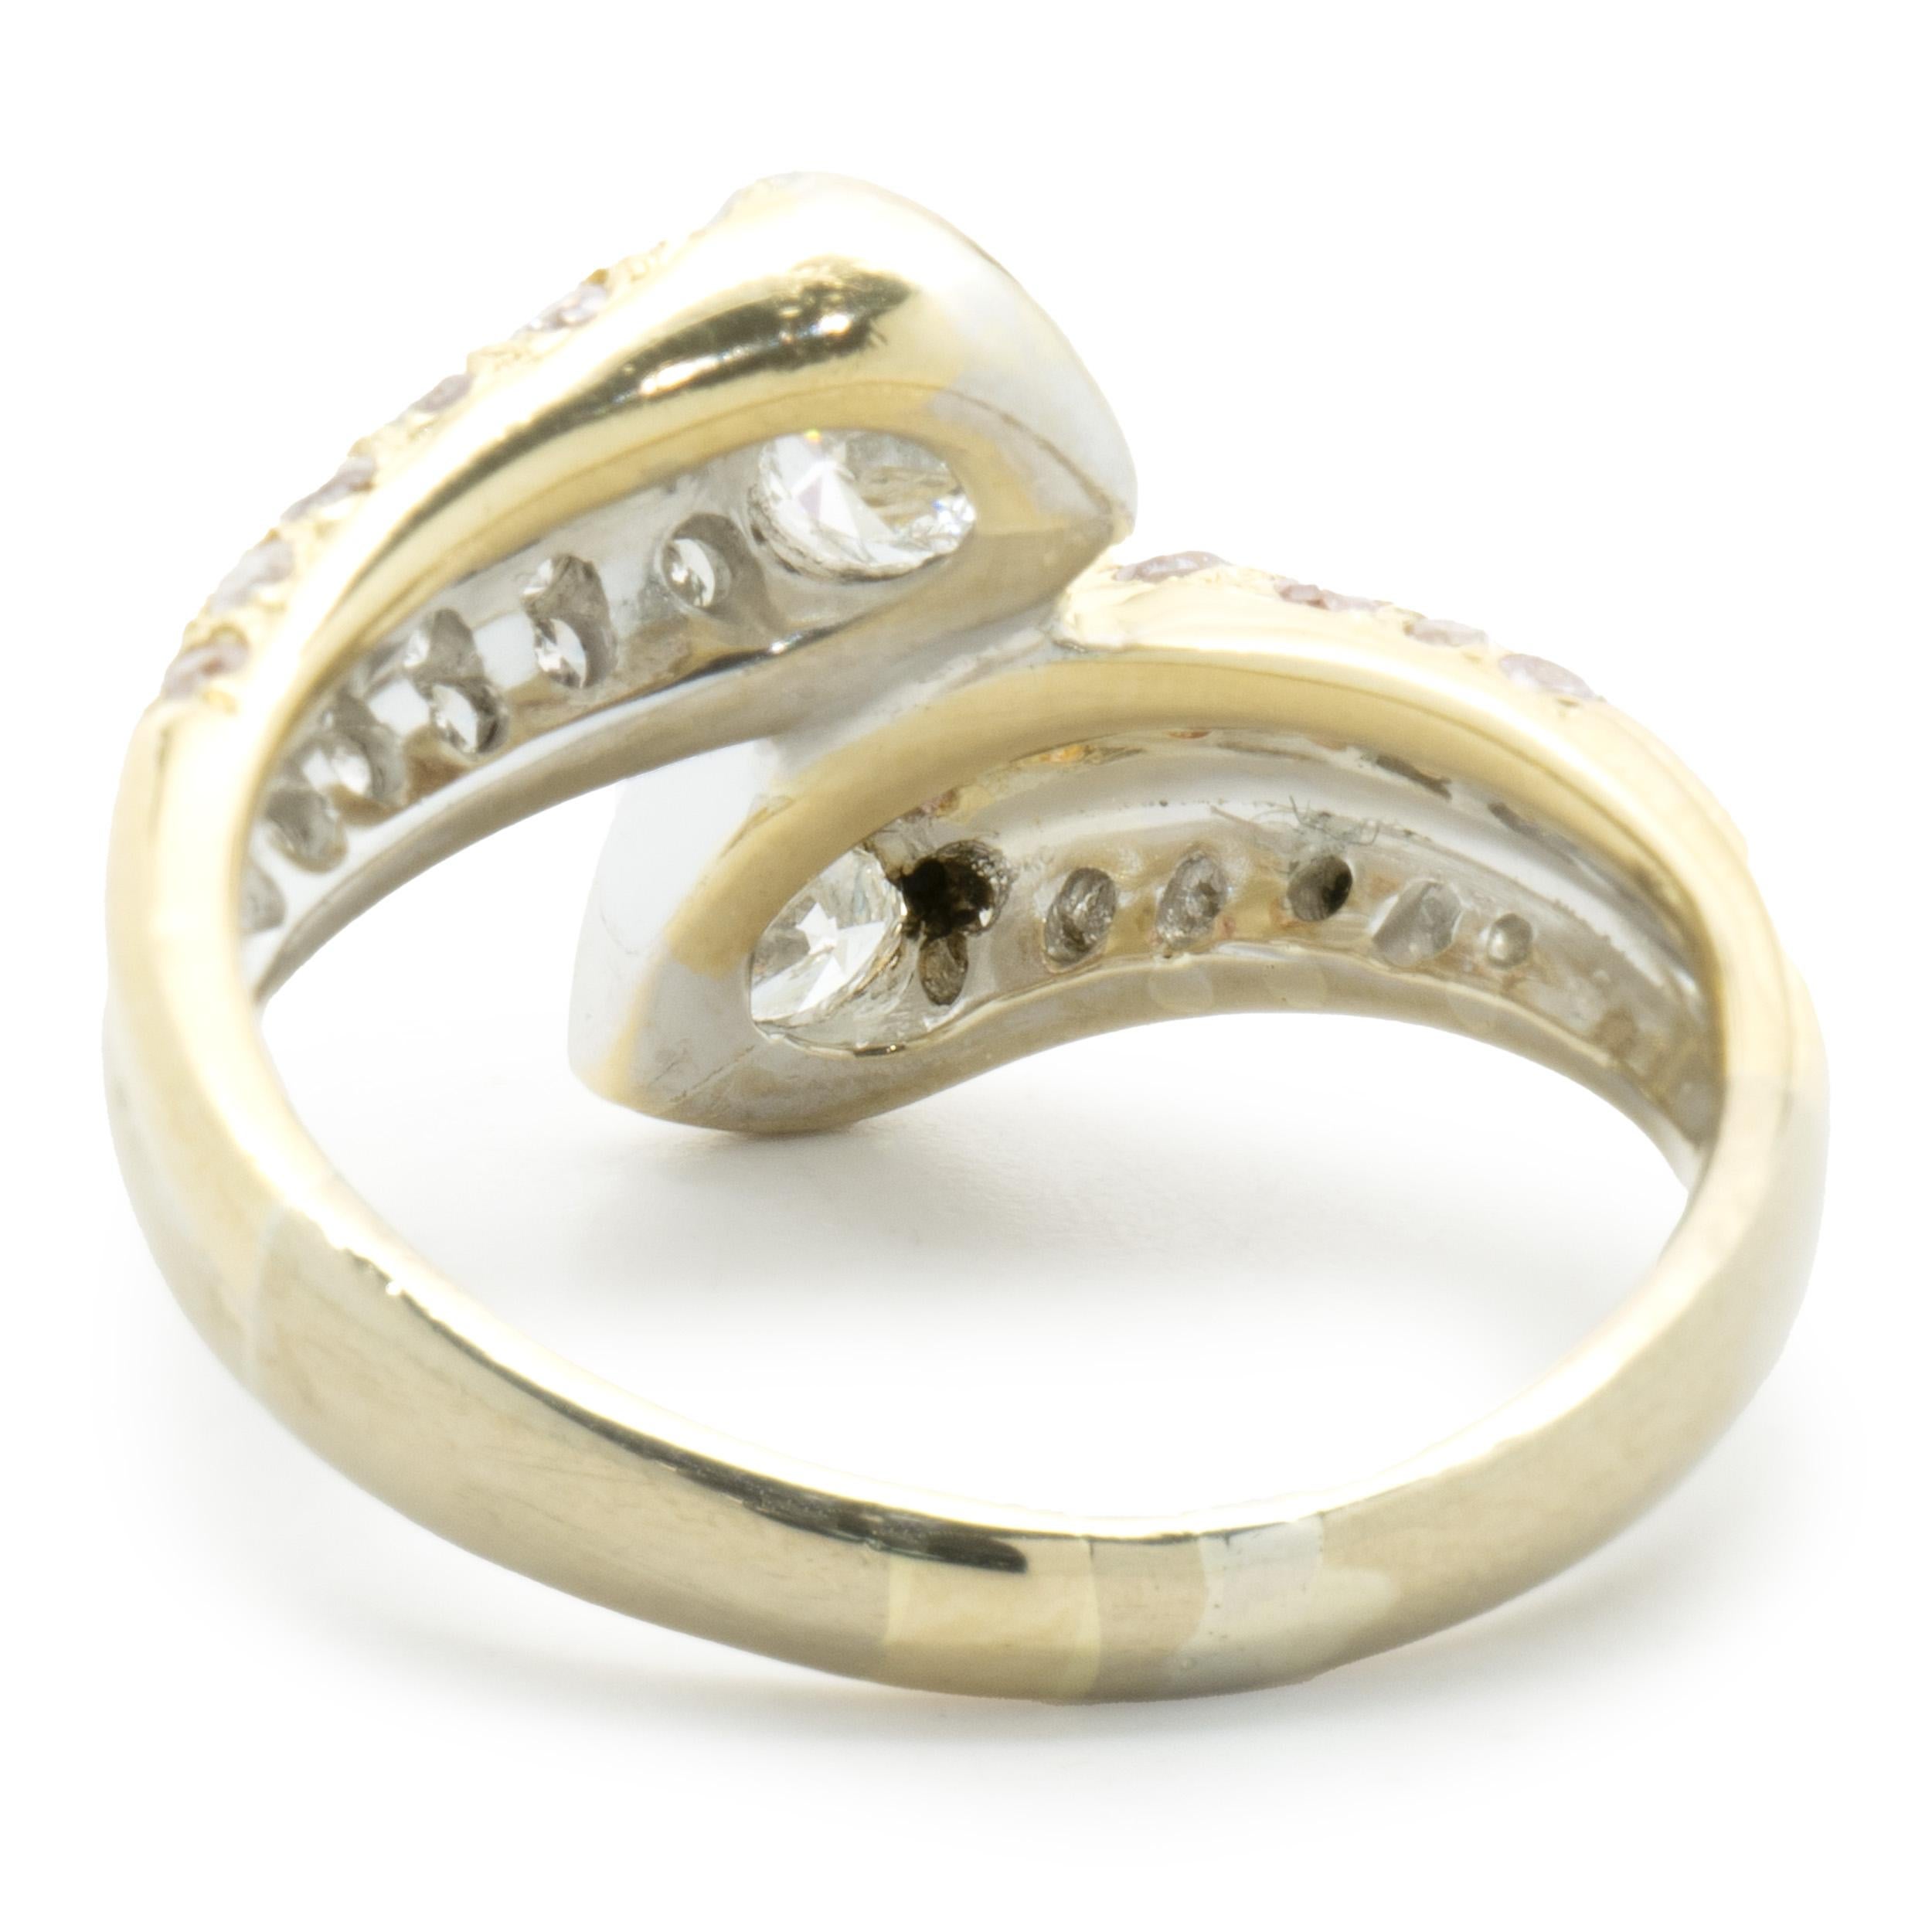 18 Karat Yellow Gold Bezel Set Heart Diamond Bypass Ring In Excellent Condition For Sale In Scottsdale, AZ